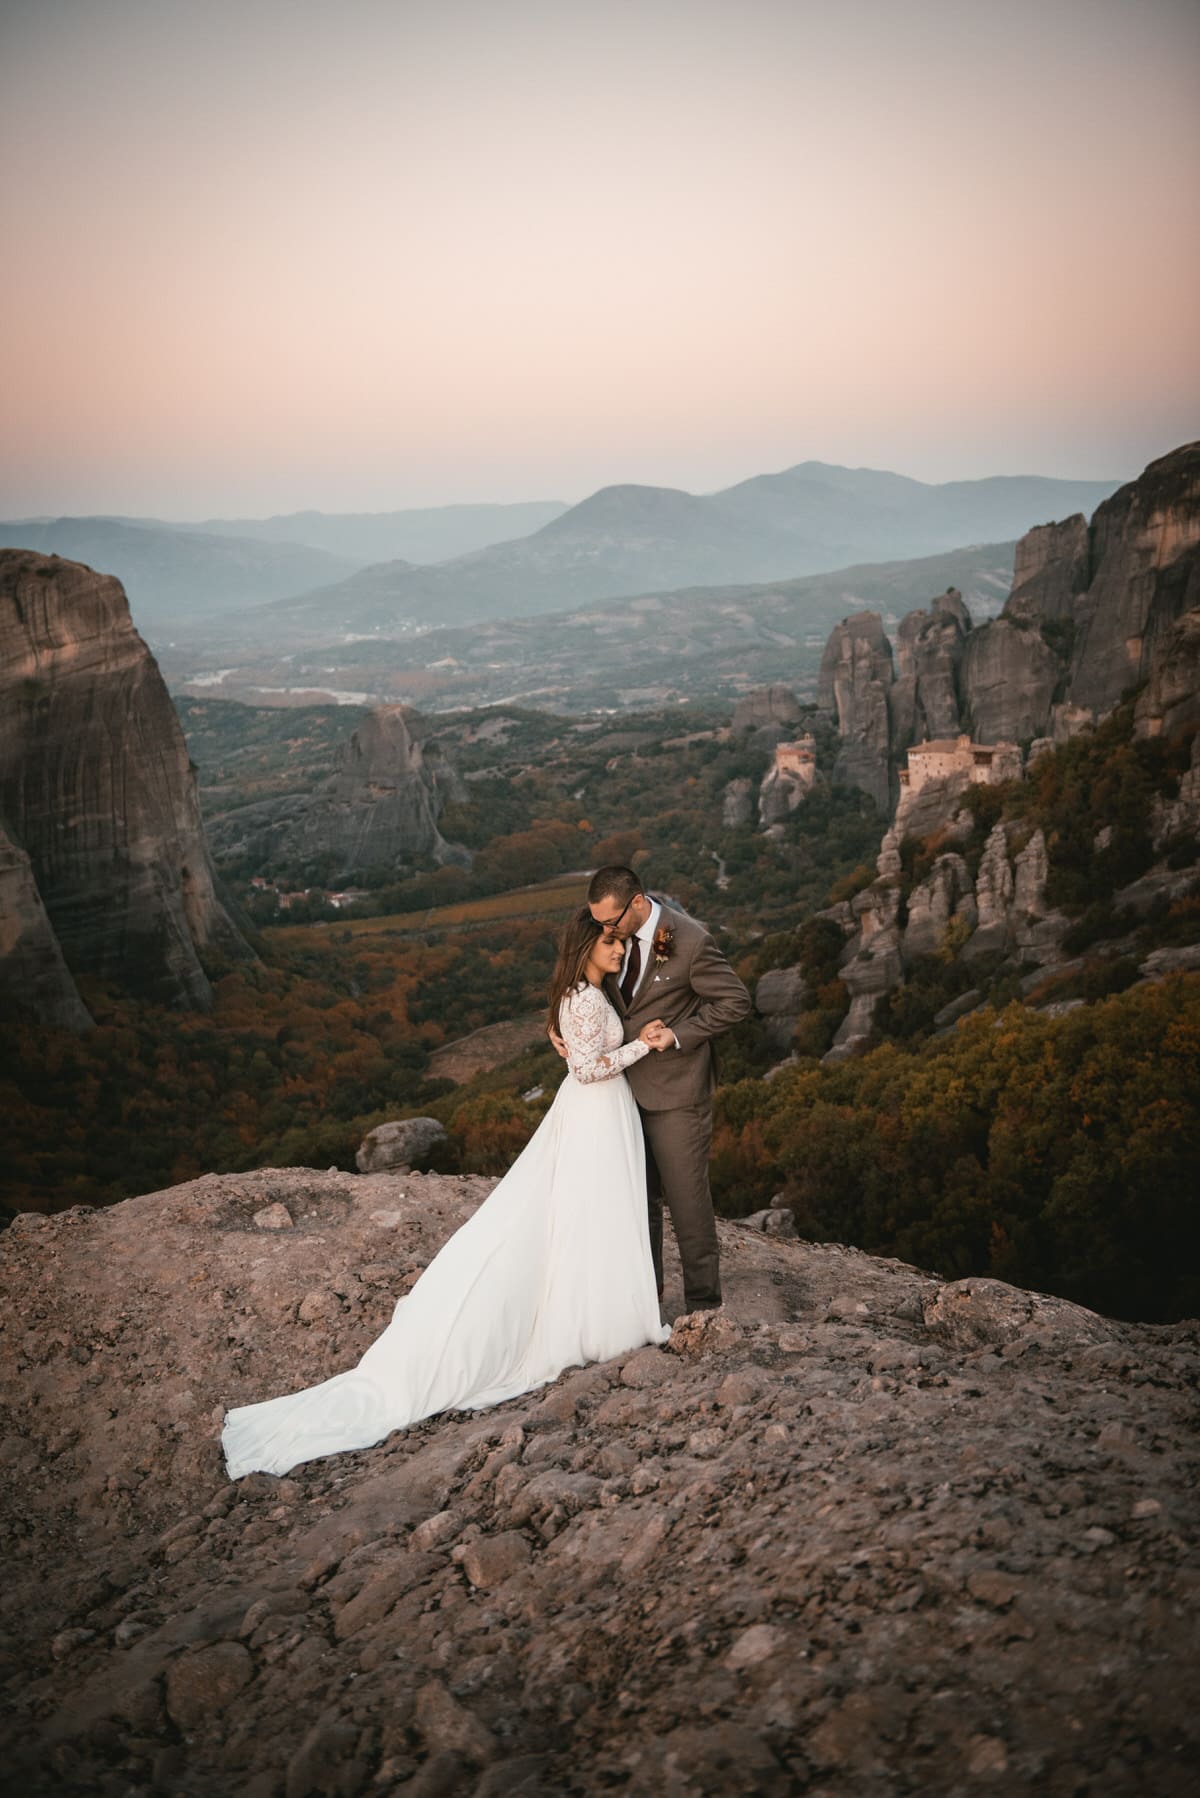 Couple during their first dance on their day after photoshoot in the Meteora in Greece